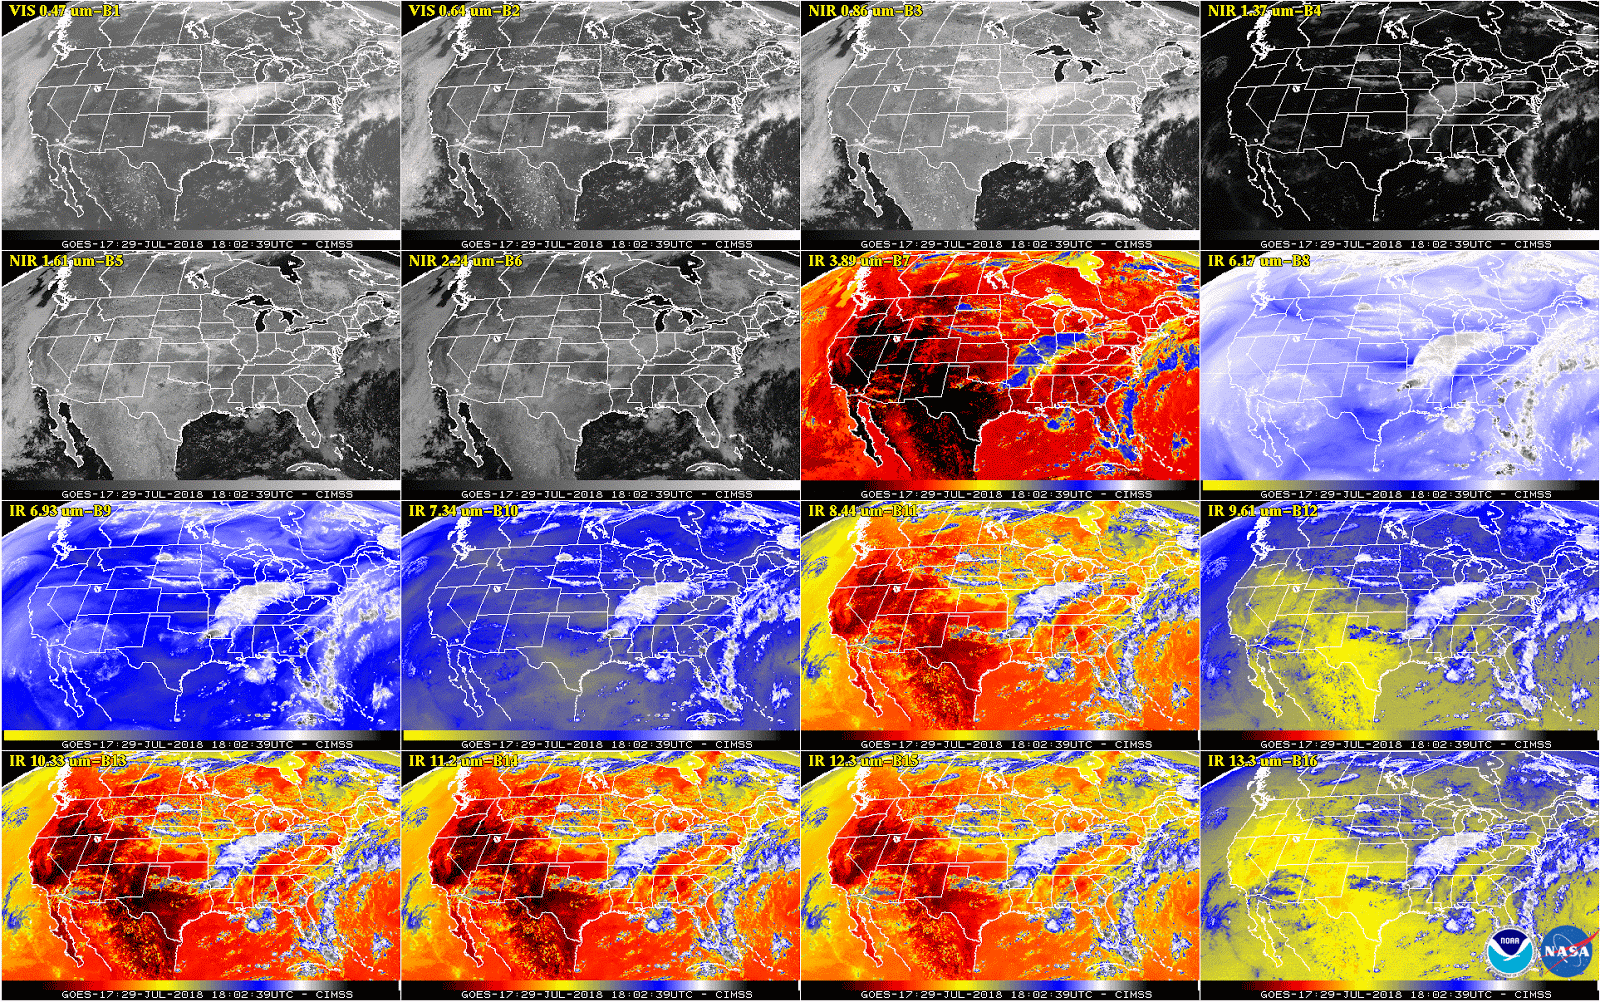 image shows a snapshot of the continental U.S. and surrounding oceans from each of the Advanced Baseline Imager channels 